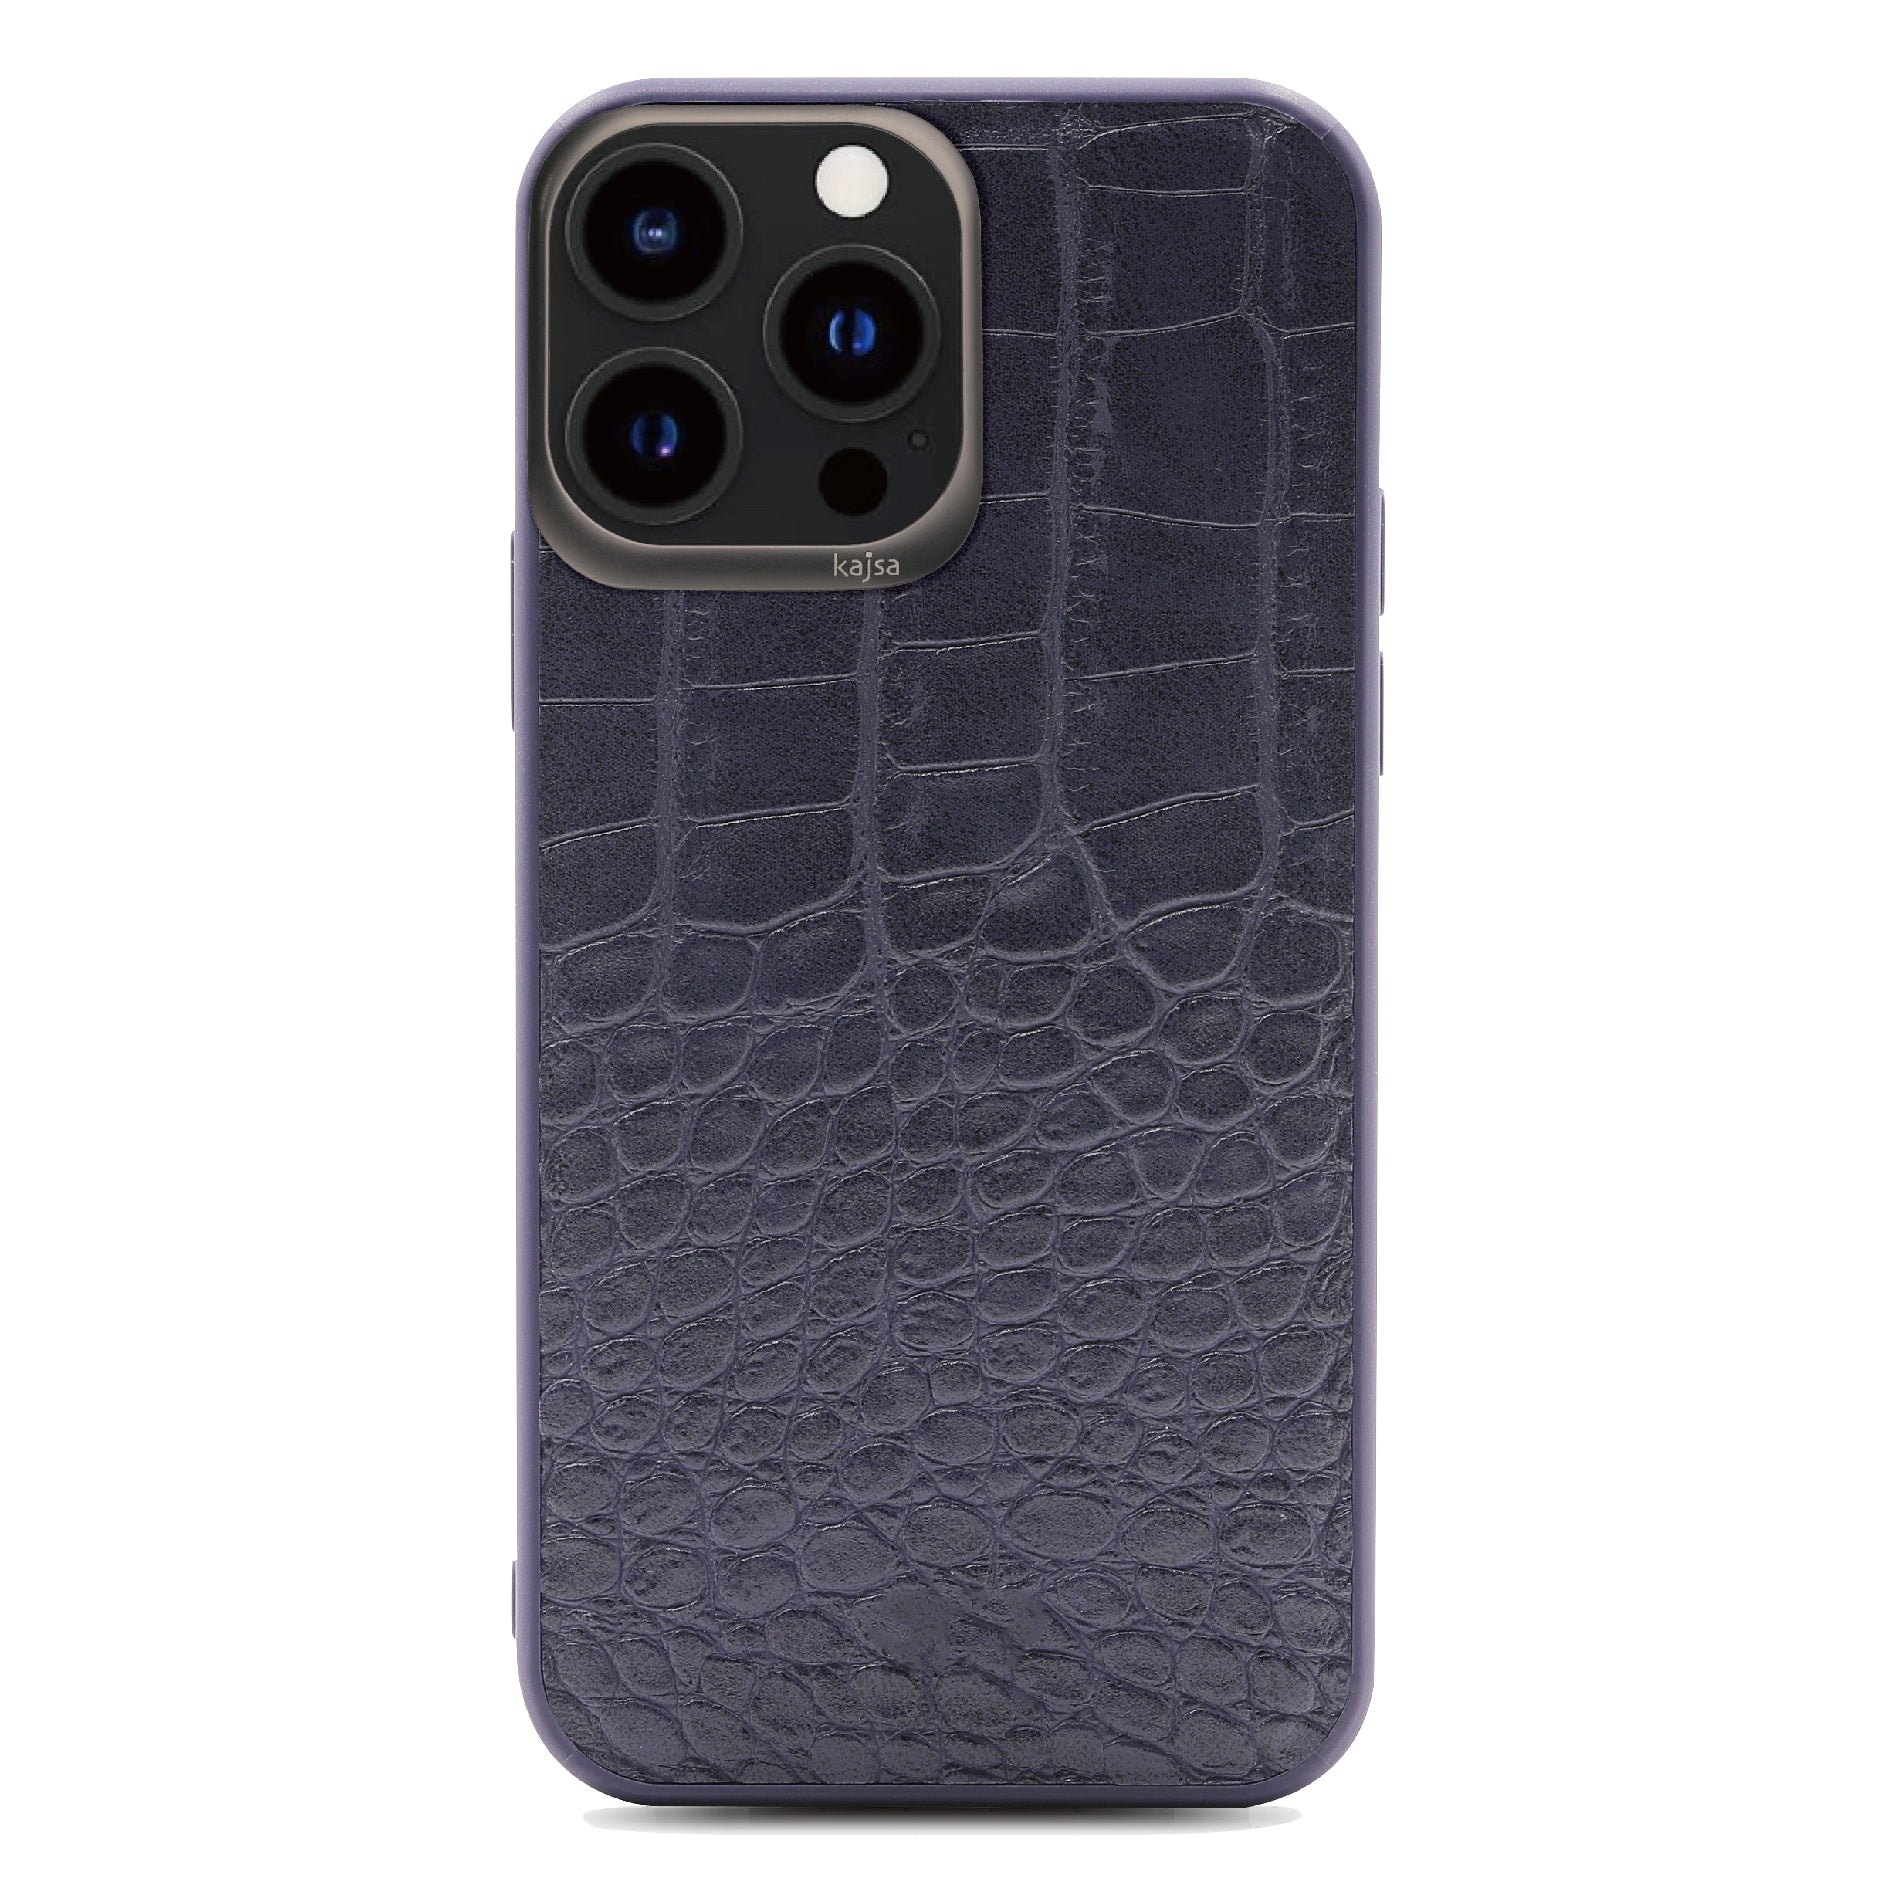 Glamorous Collection - Croco II Back Case for iPhone 13-Phone Case- phone case - phone cases- phone cover- iphone cover- iphone case- iphone cases- leather case- leather cases- DIYCASE - custom case - leather cover - hand strap case - croco pattern case - snake pattern case - carbon fiber phone case - phone case brand - unique phone case - high quality - phone case brand - protective case - buy phone case hong kong - online buy phone case - iphone‎手機殼 - 客製化手機殼 - samsung ‎手機殼 - 香港手機殼 - 買電話殼